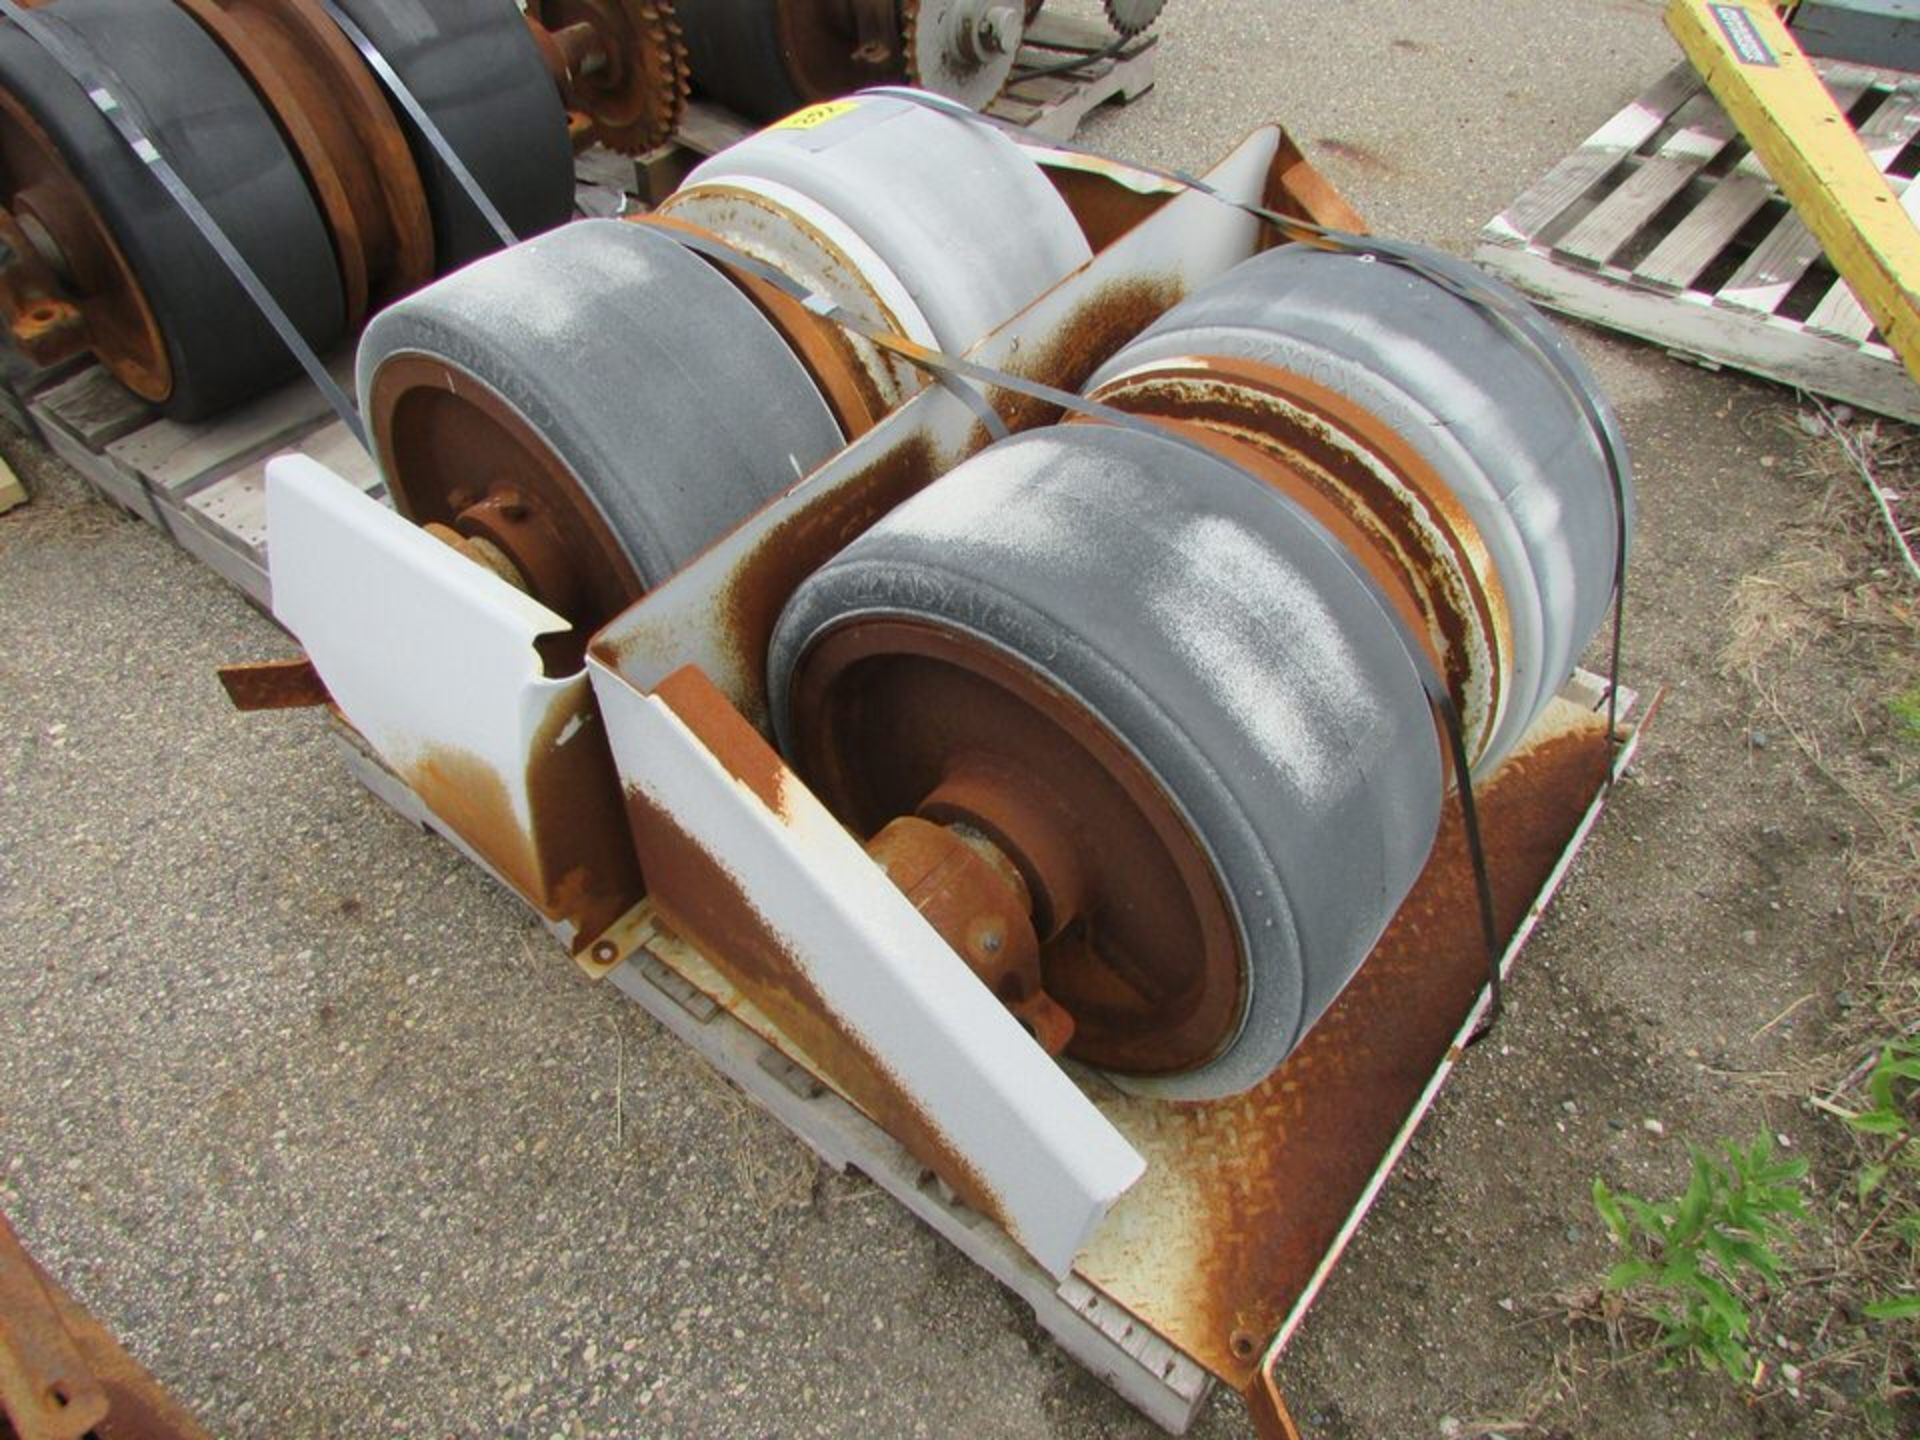 Spare Set of (2) 40-Ton Welding Positioner Idler Rollers. Loc. 420 Main Ave E, West Fargo, ND 58079 - Image 3 of 3